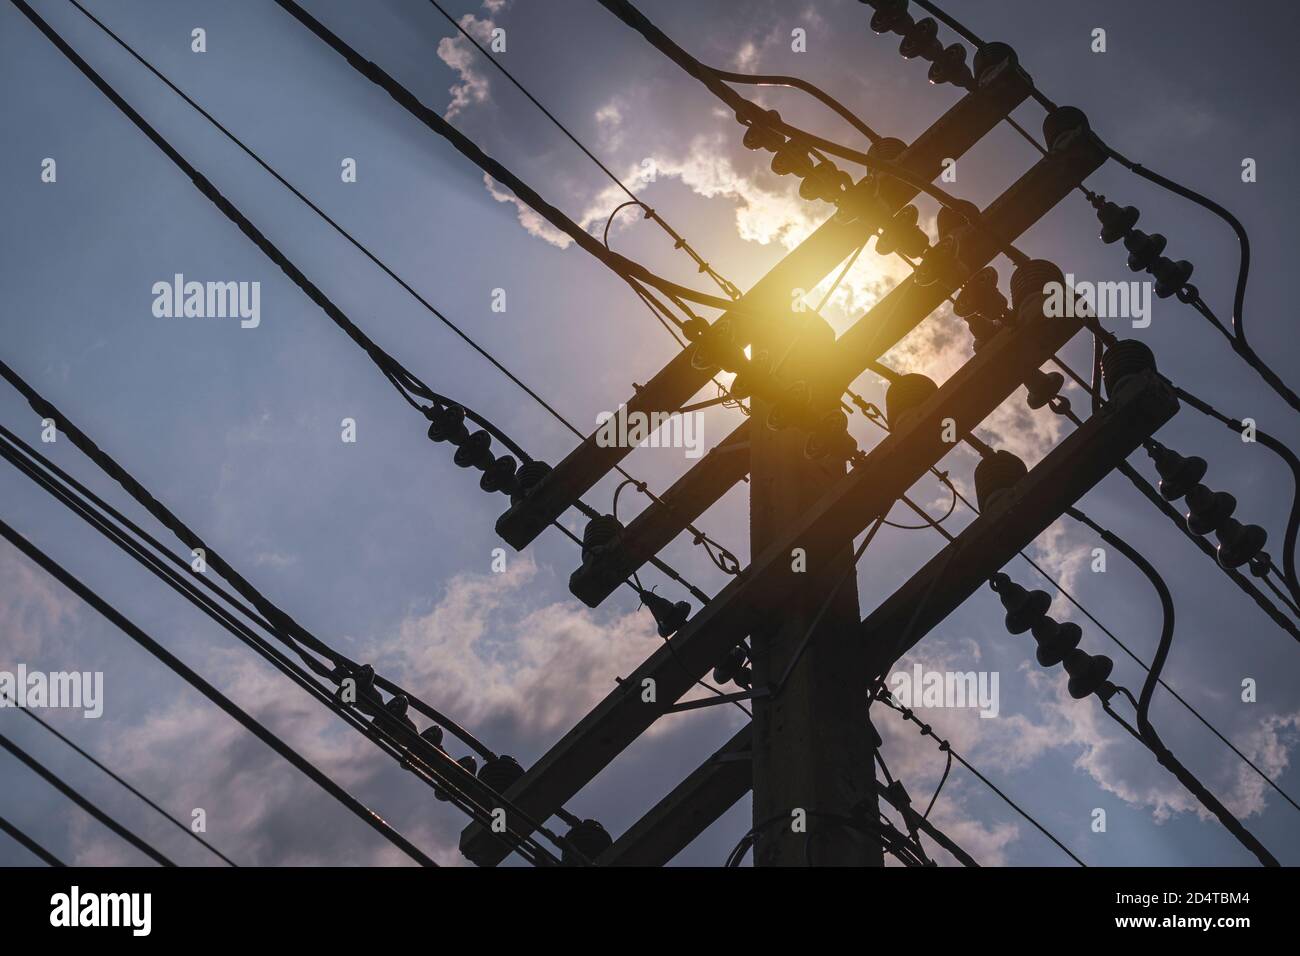 High voltage distribution system consisting of a pole, shielded high voltage cable, insulators support high voltage cables. Stock Photo